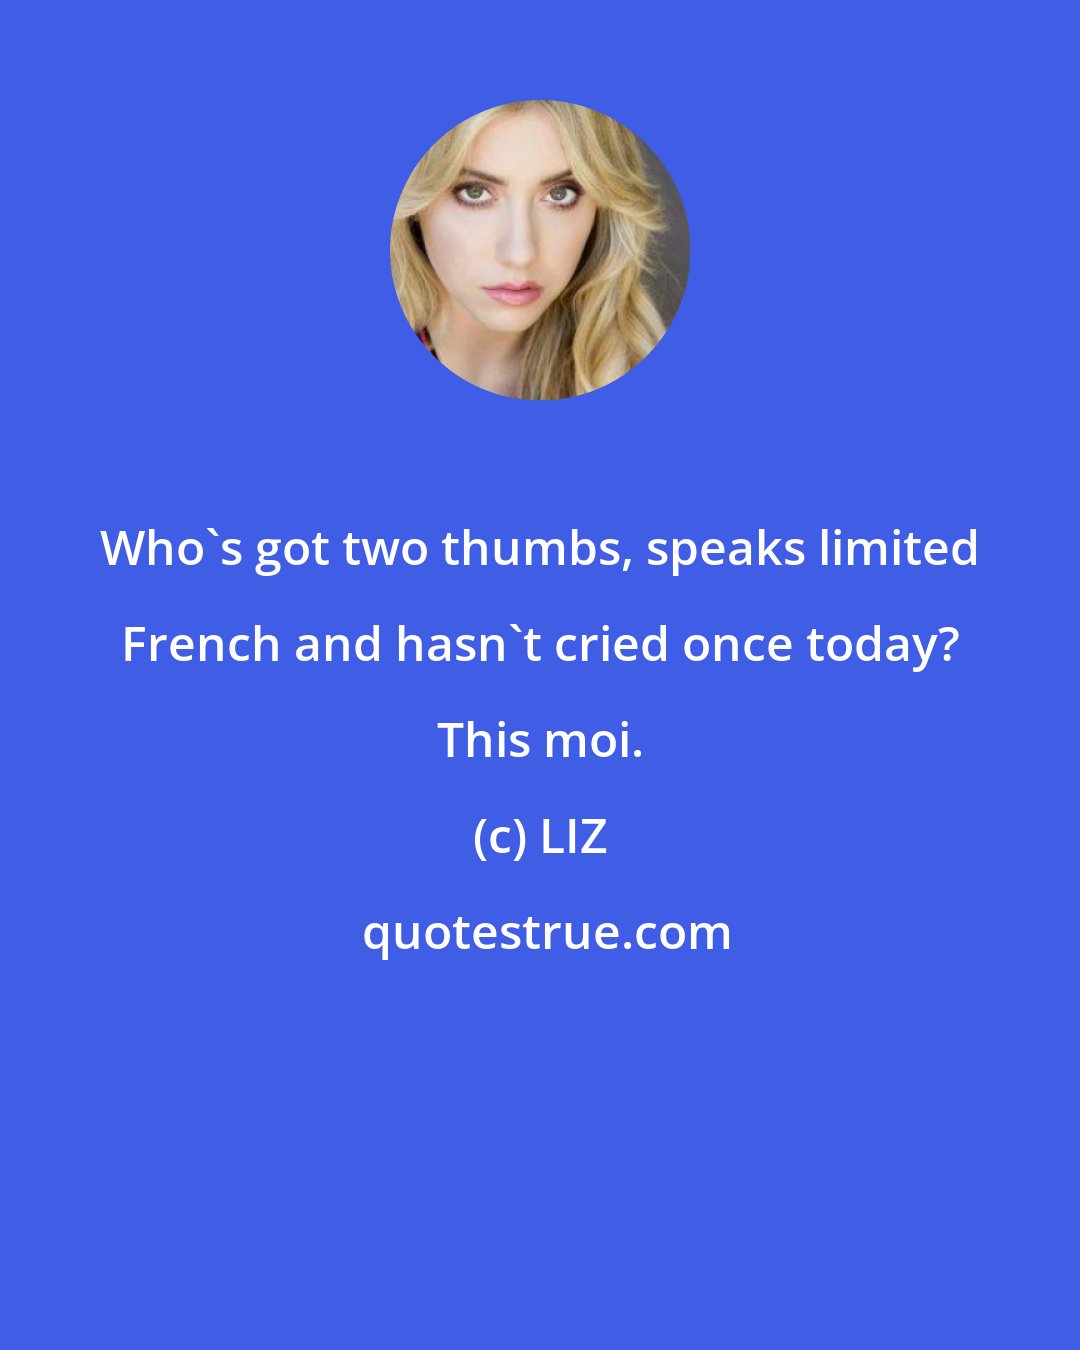 LIZ: Who's got two thumbs, speaks limited French and hasn't cried once today? This moi.